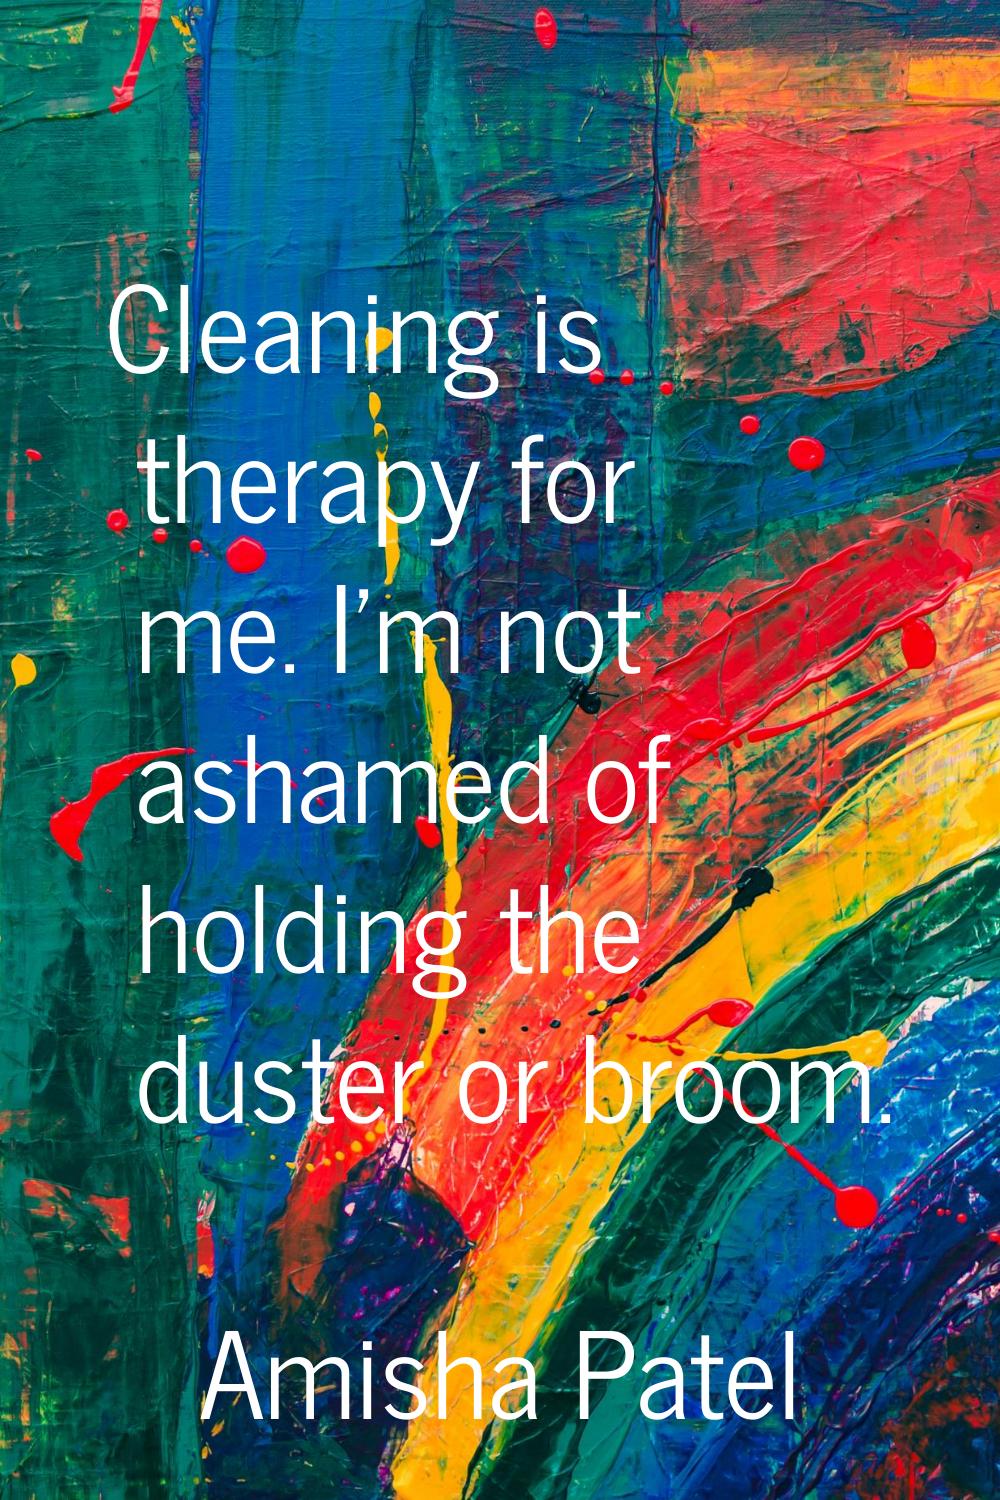 Cleaning is therapy for me. I'm not ashamed of holding the duster or broom.